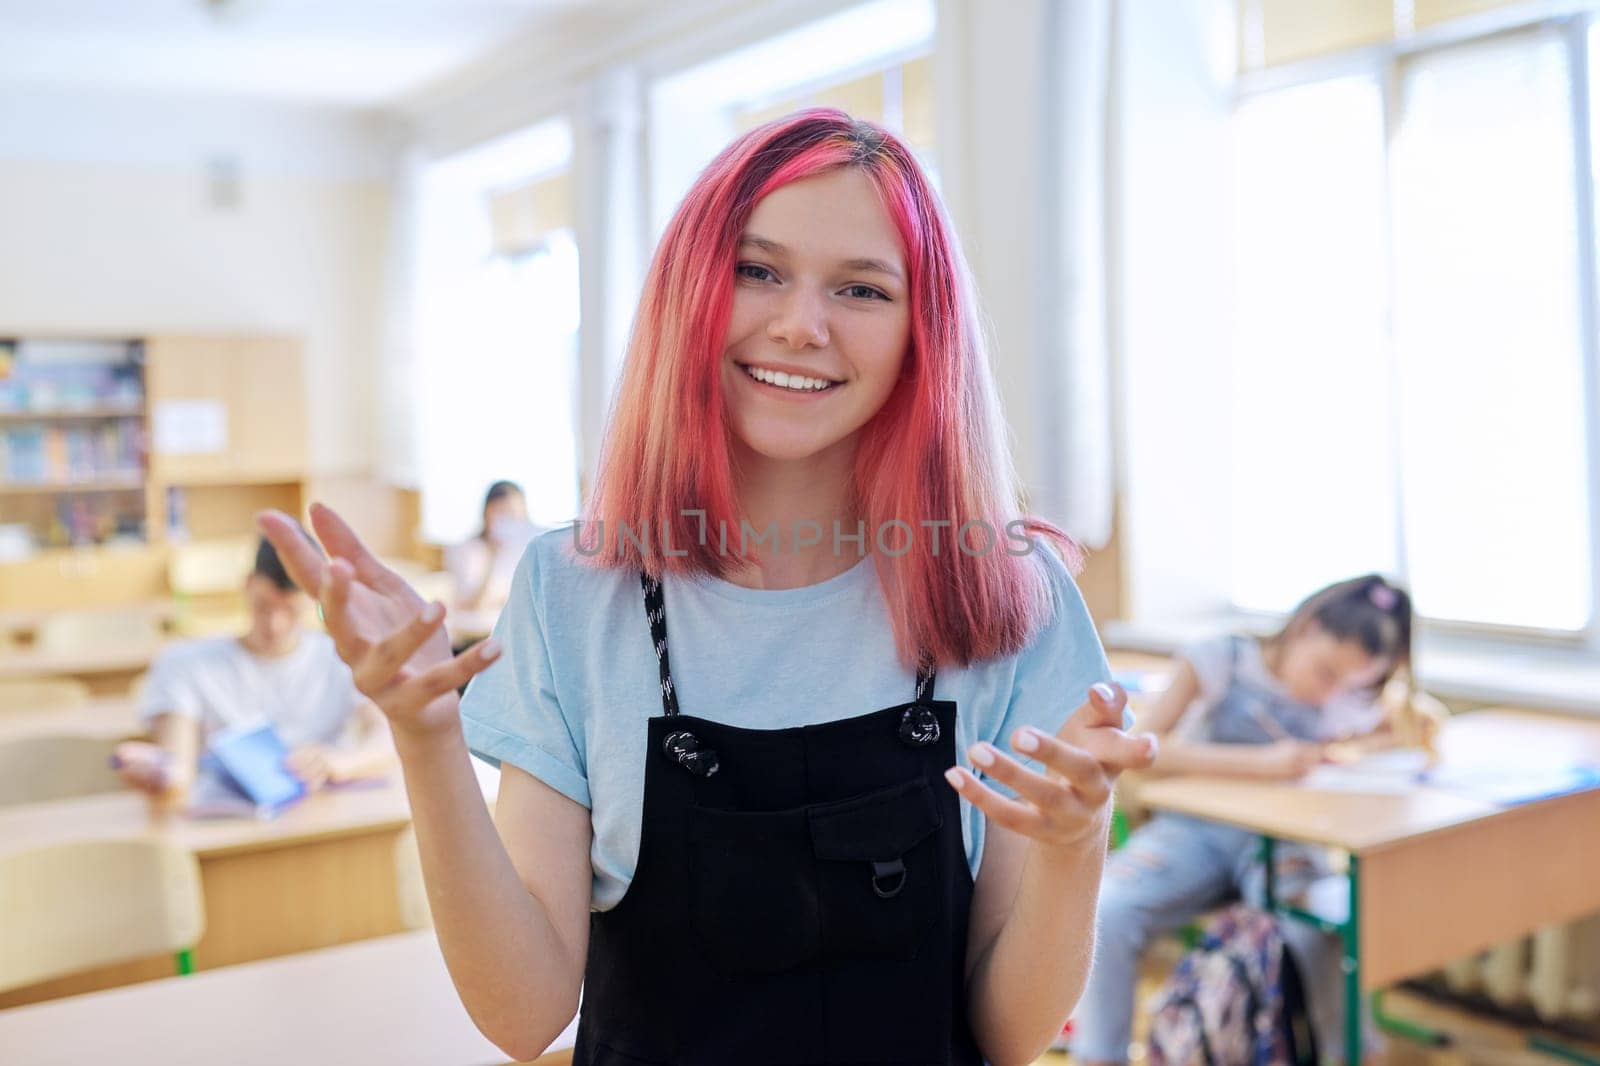 Talking gesturing smiling teenage student at lesson in classroom, trendy beautiful girl looking at camera, background students sitting at desks